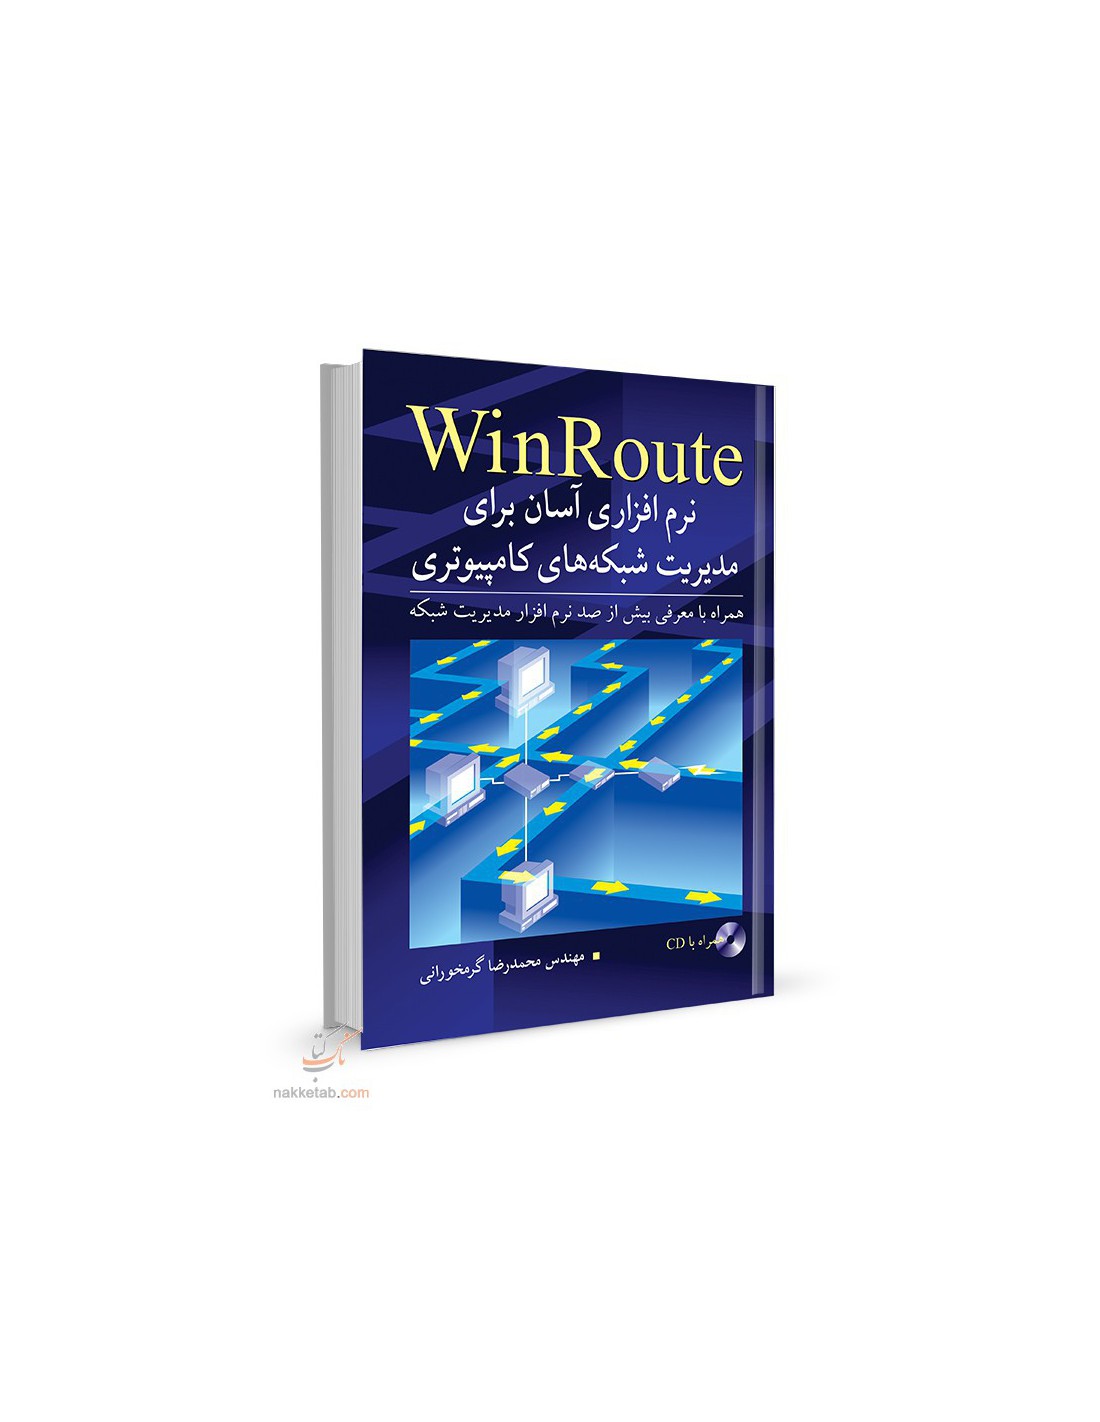 winroute download